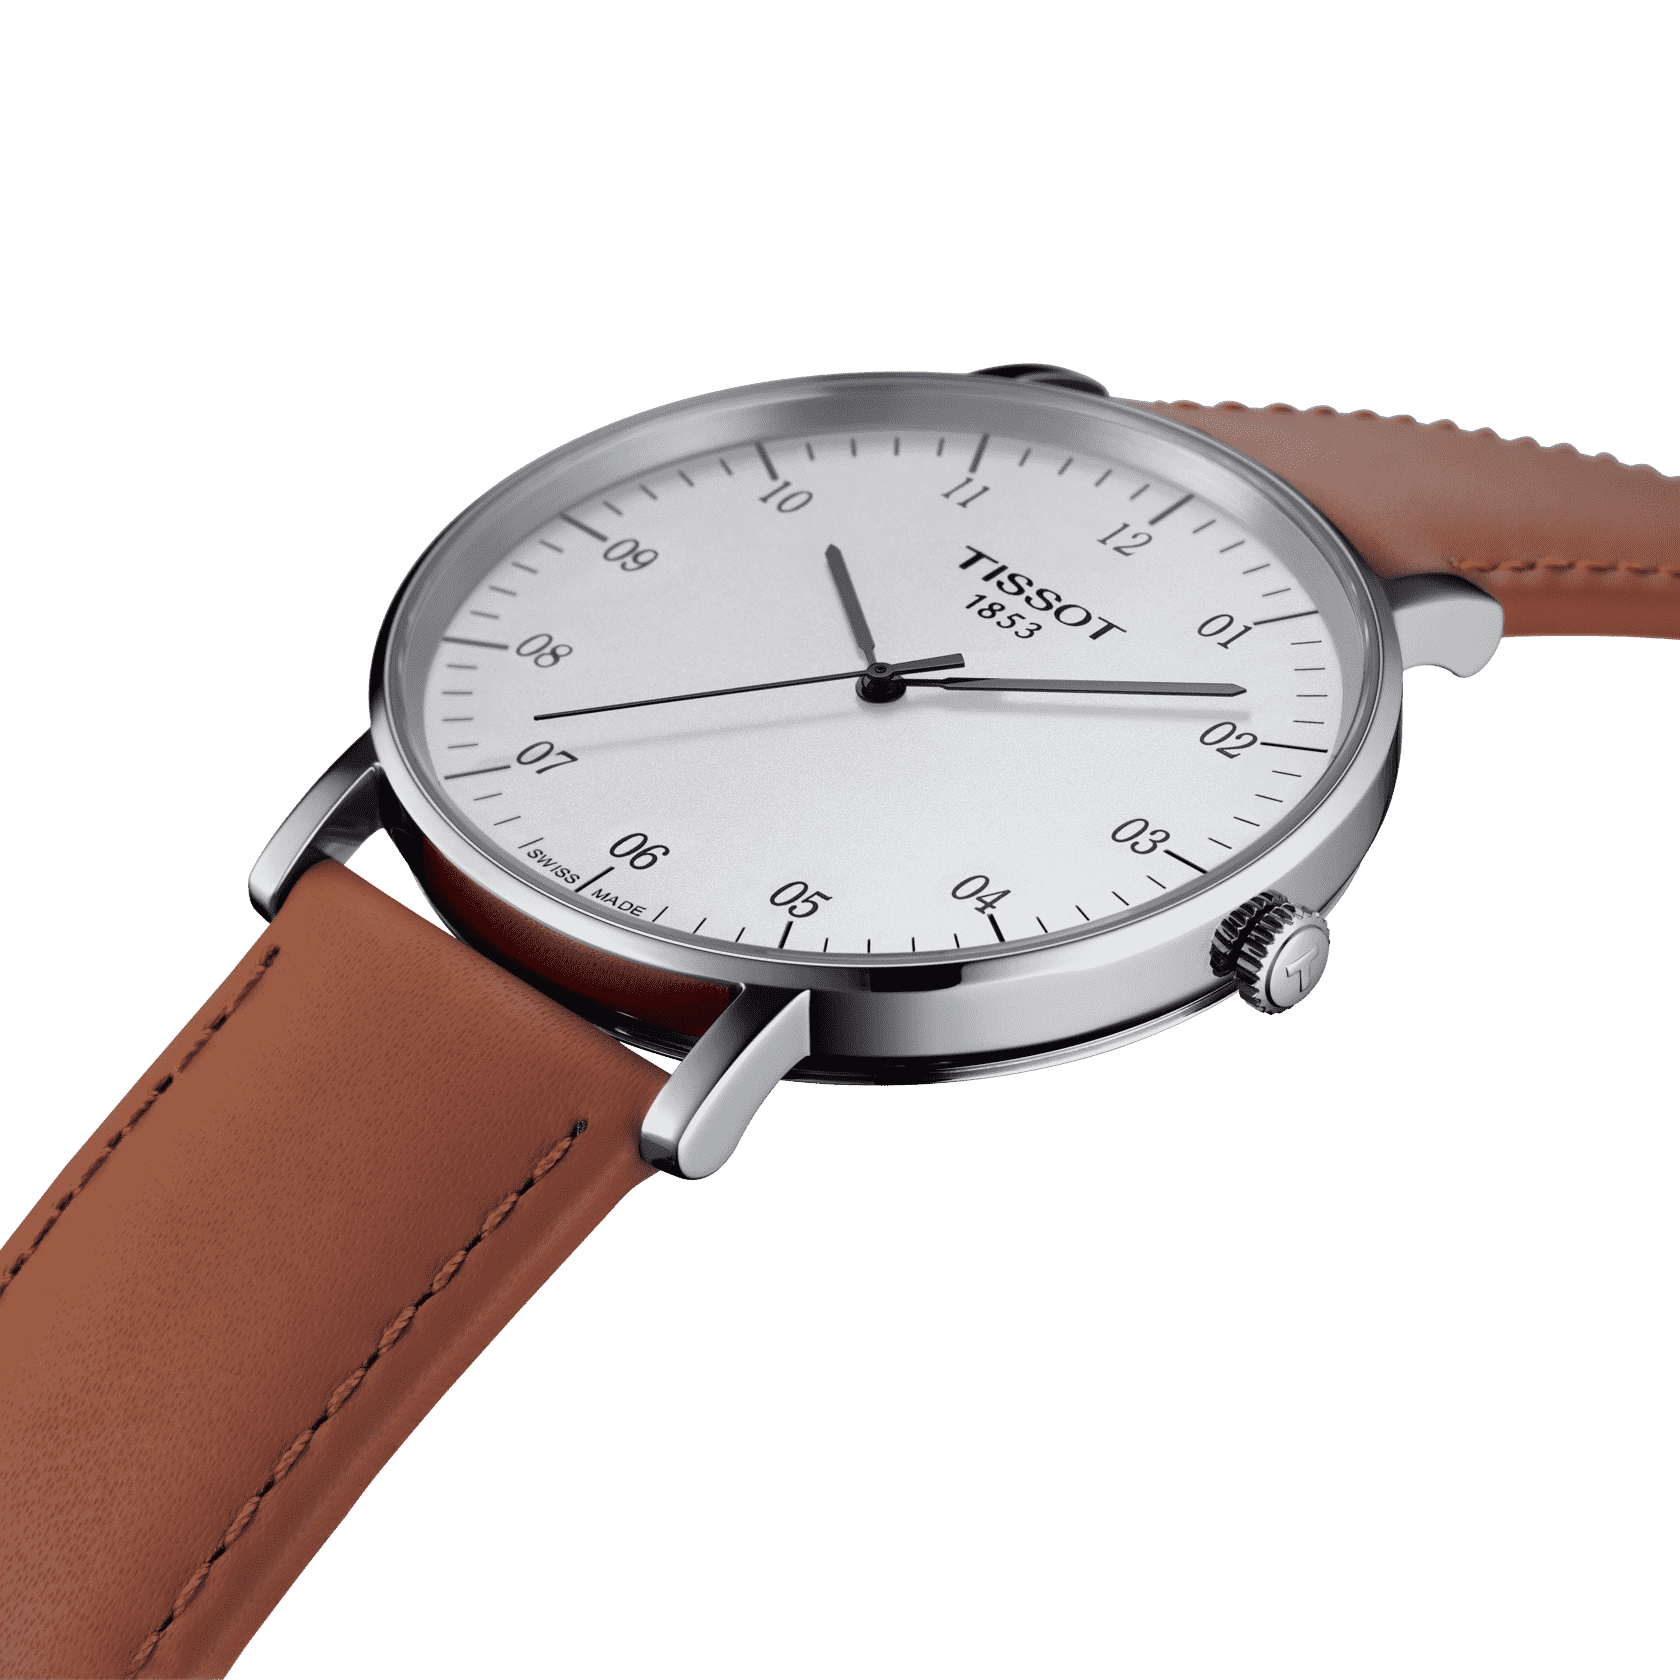 Cheap Fake Watches Sites